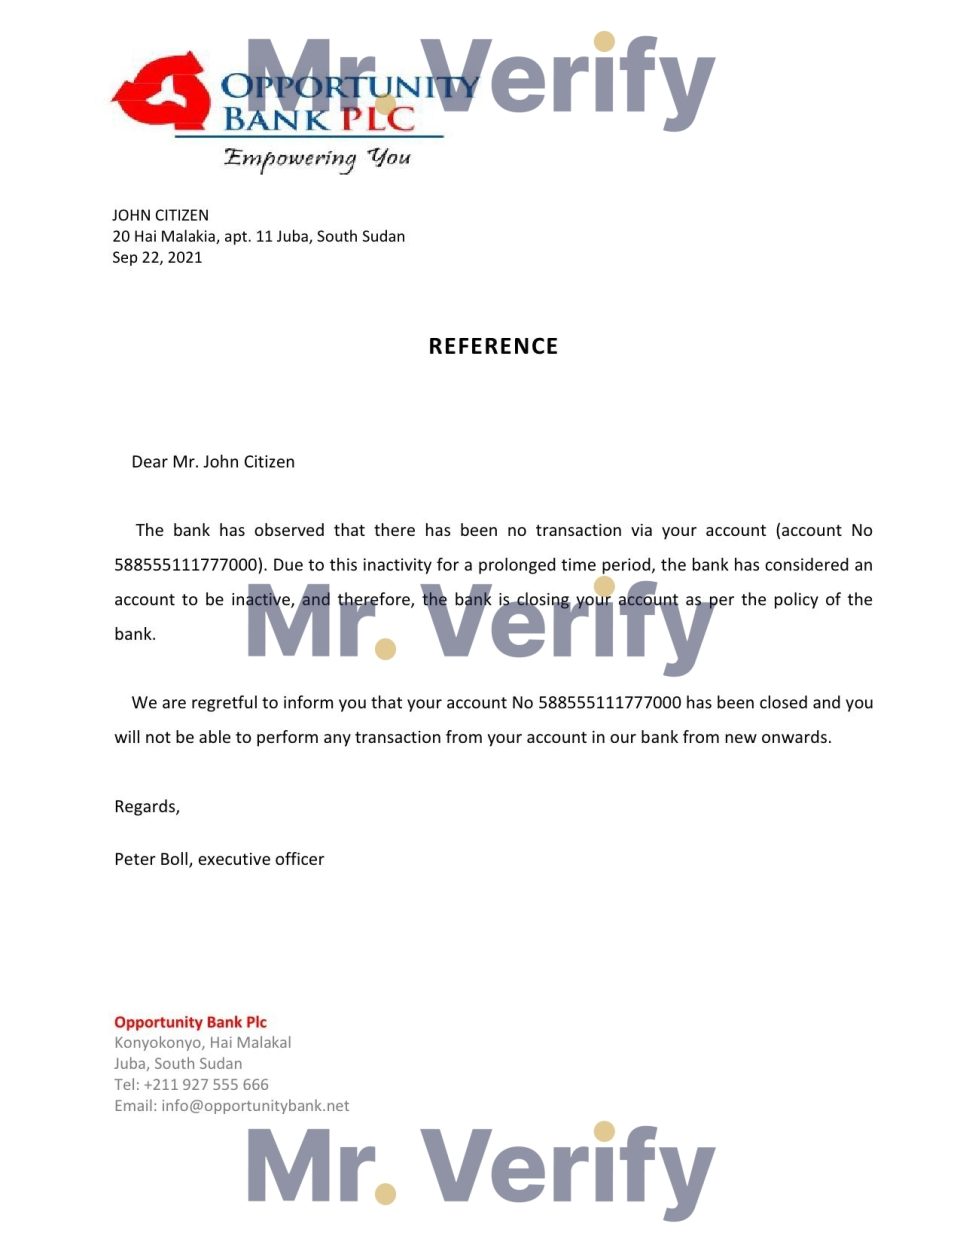 Download South Sudan Opportunity Bank Reference Letter Templates | Editable Word